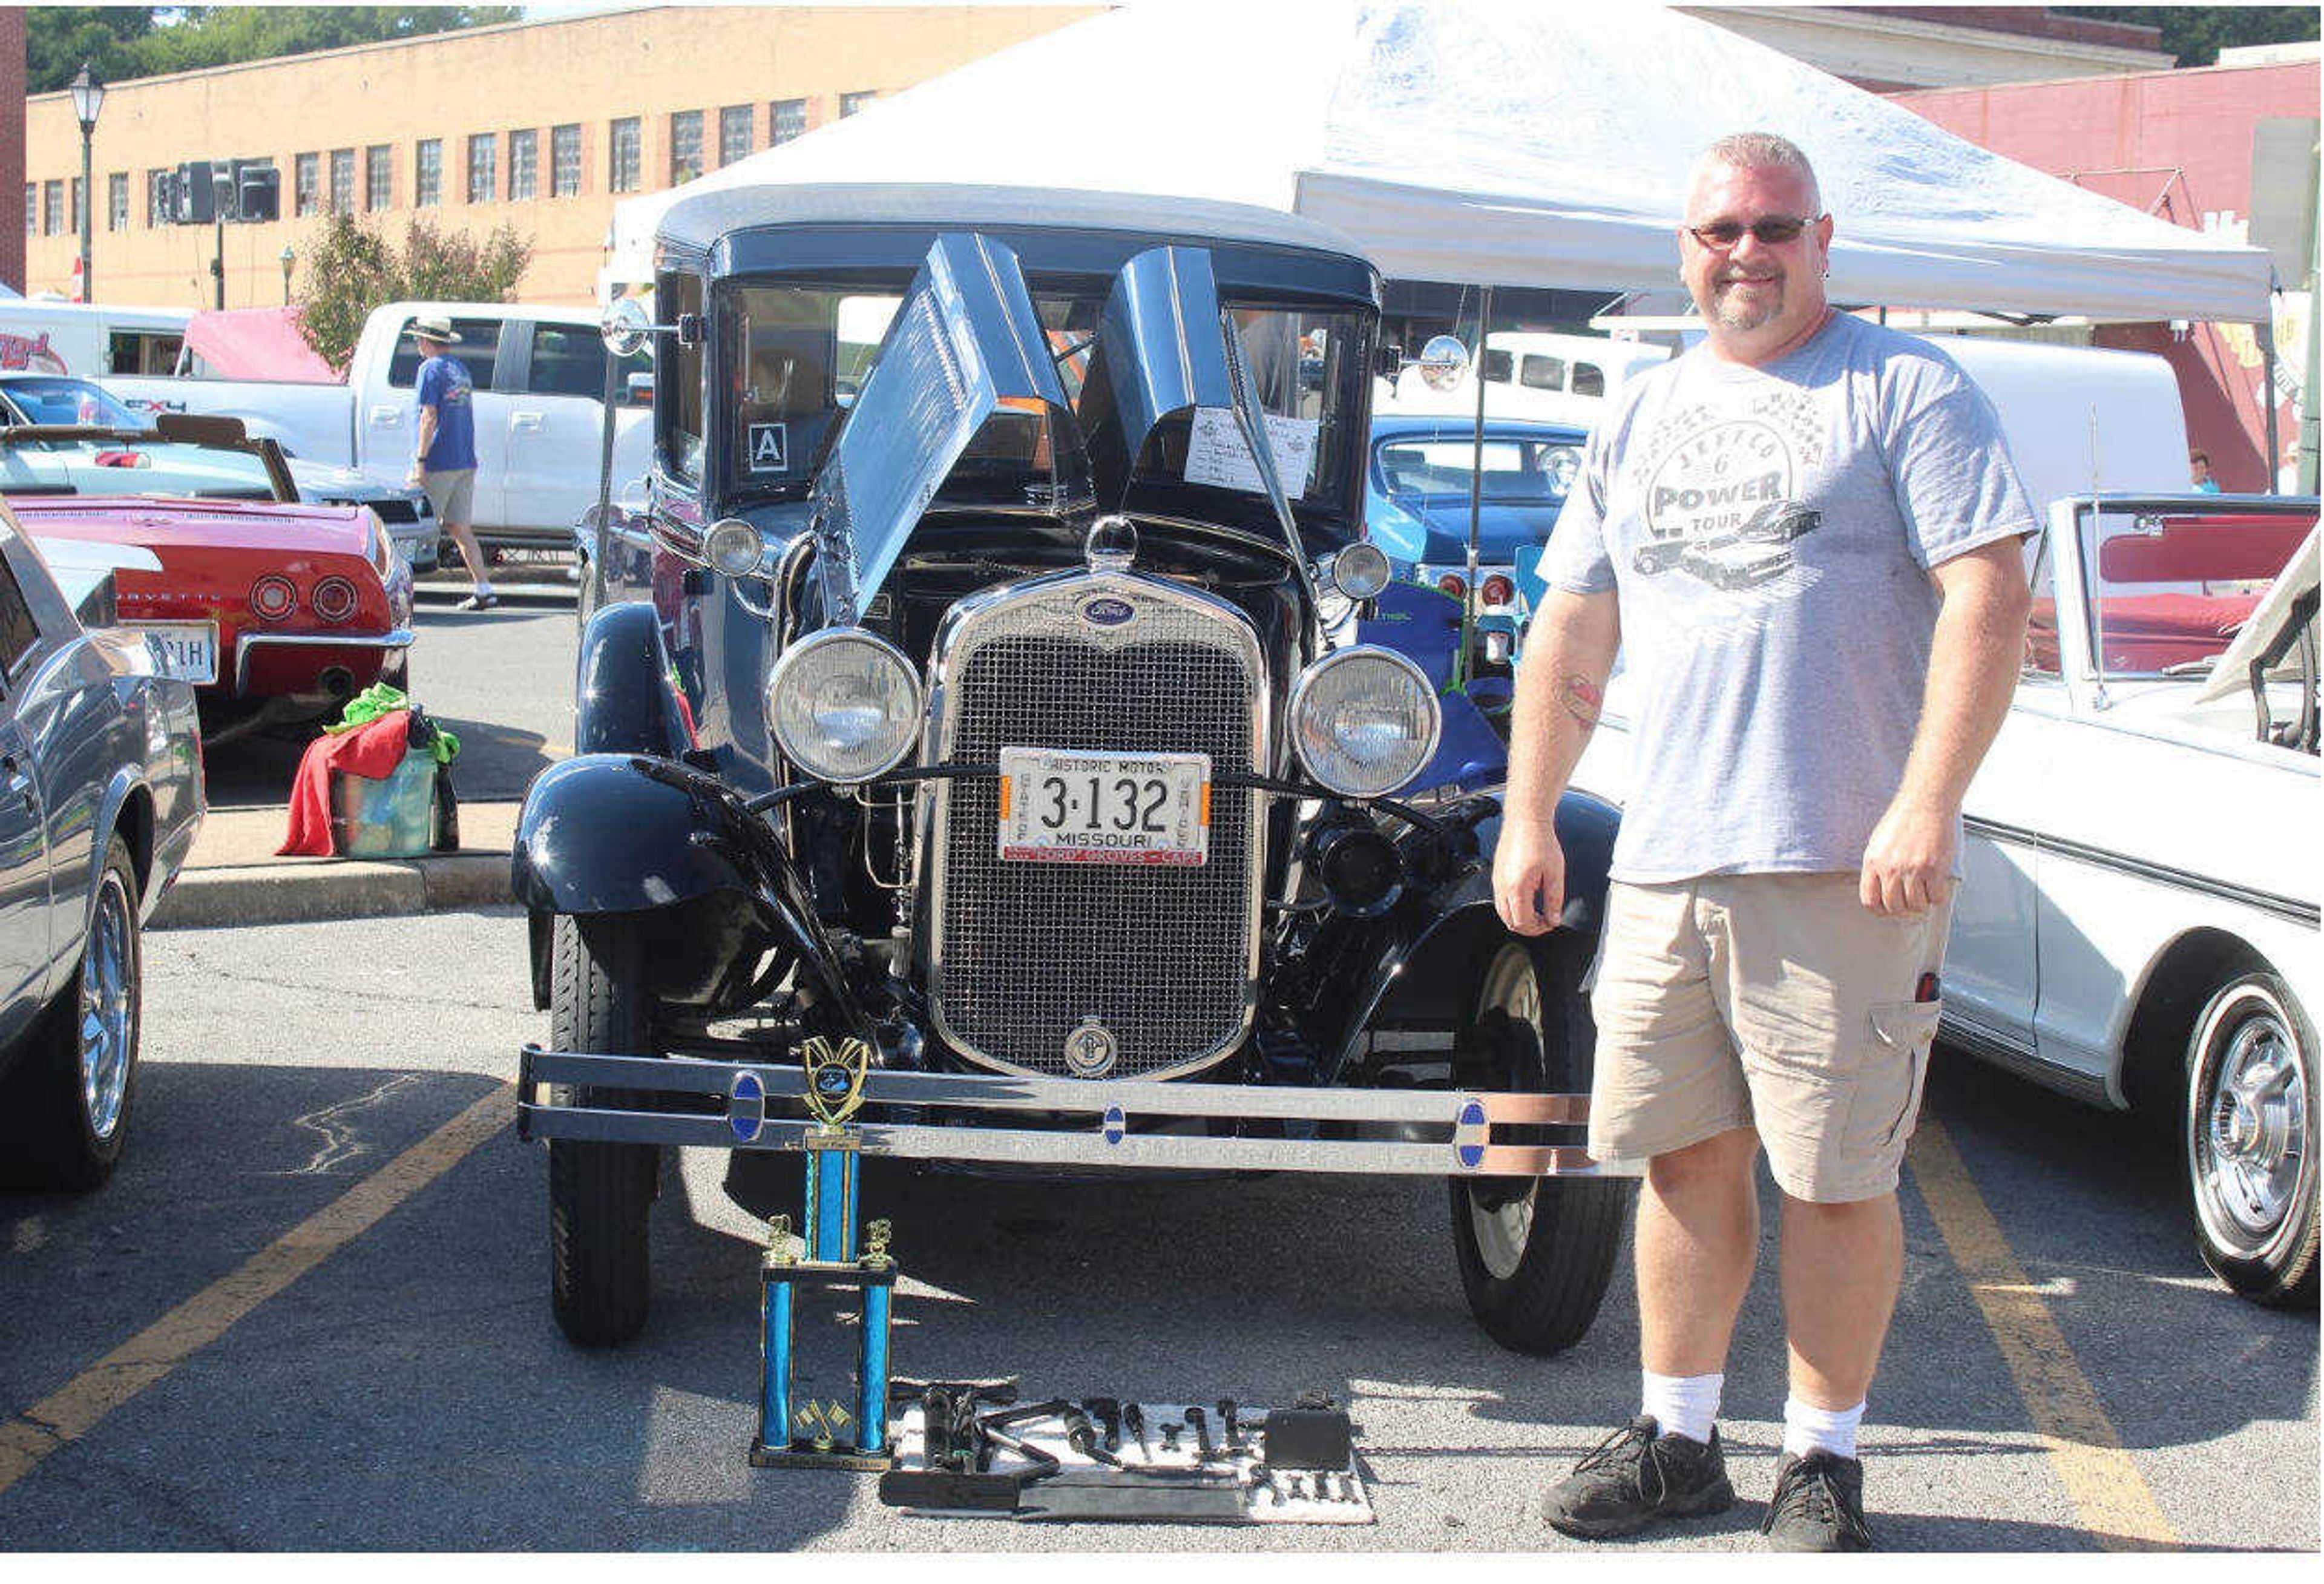 Dave Smith with his first place trophy in front of his 1932 Ford Model A.